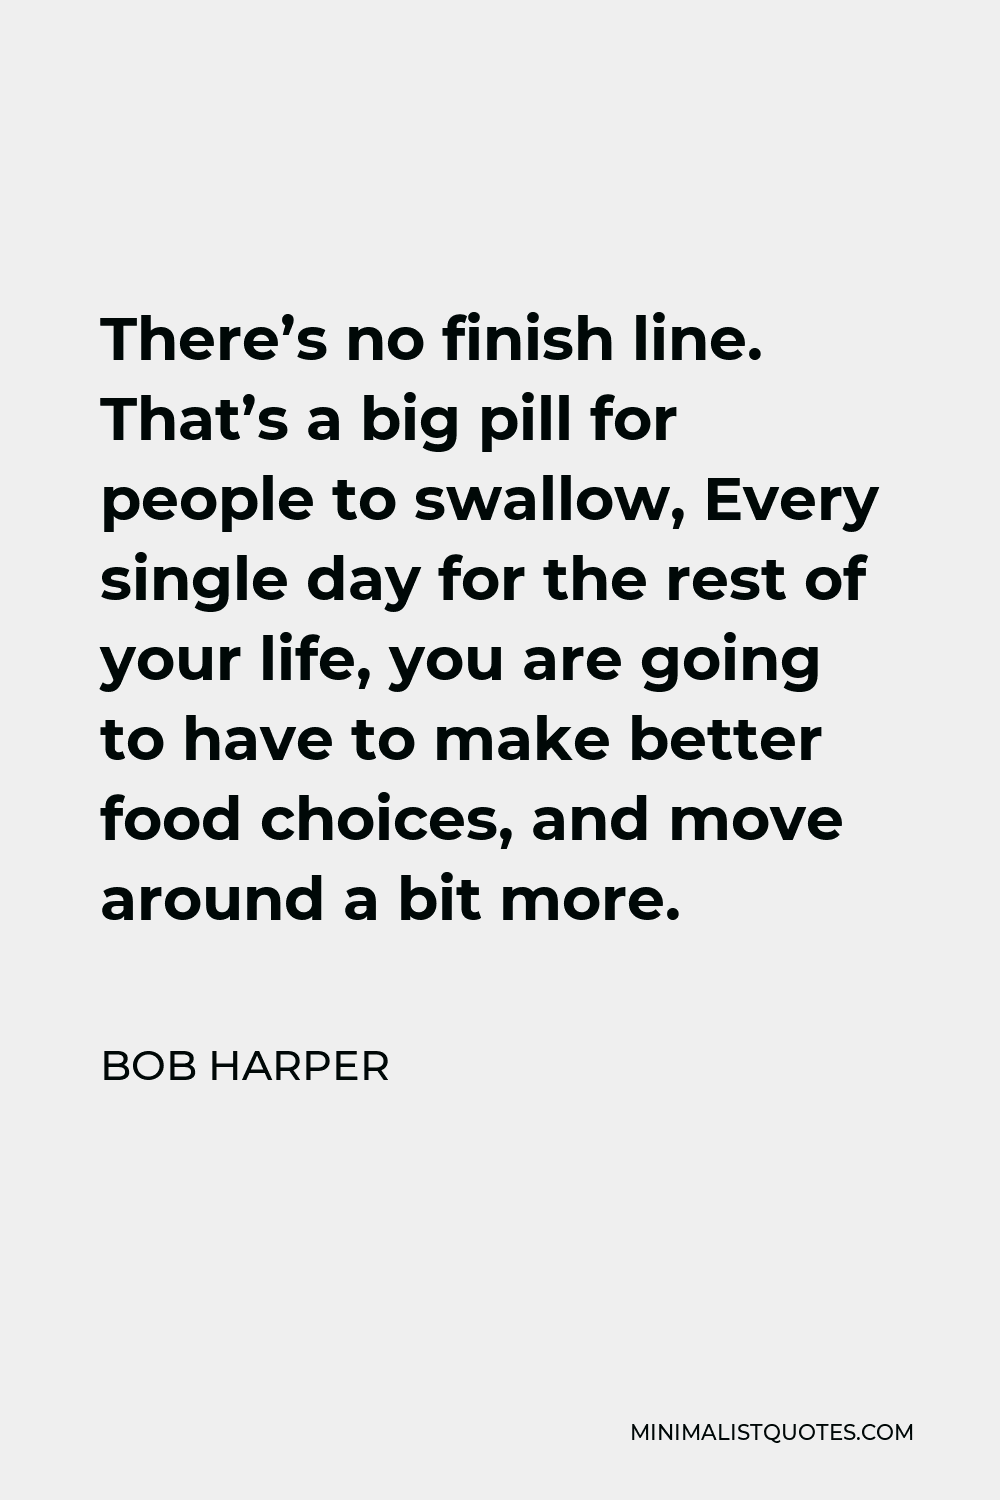 Bob Harper Quote - There’s no finish line. That’s a big pill for people to swallow, Every single day for the rest of your life, you are going to have to make better food choices, and move around a bit more.